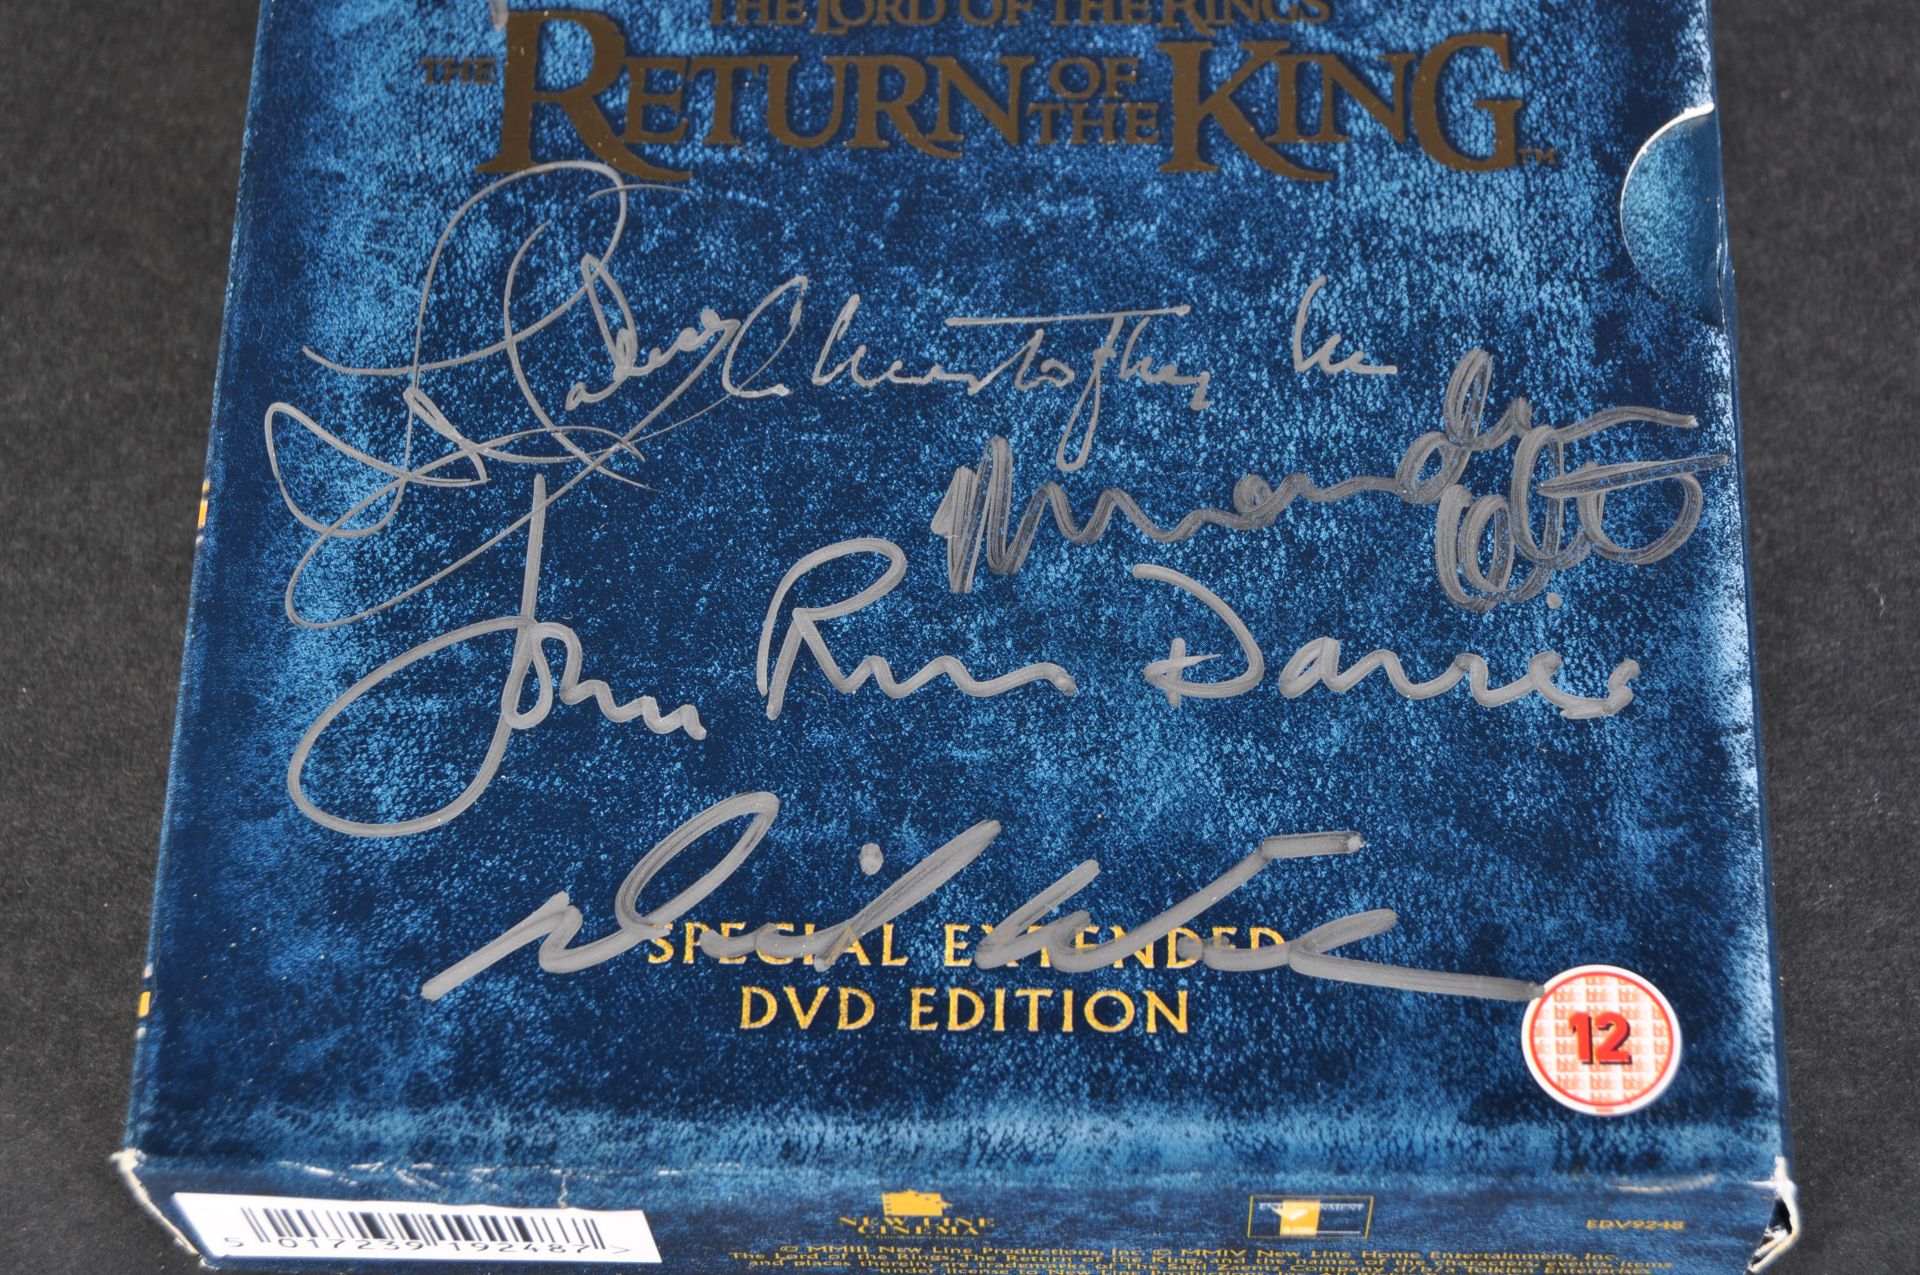 LORD OF THE RINGS - RETURN OF THE KING - MULTI-SIGNED DVD - Image 2 of 4